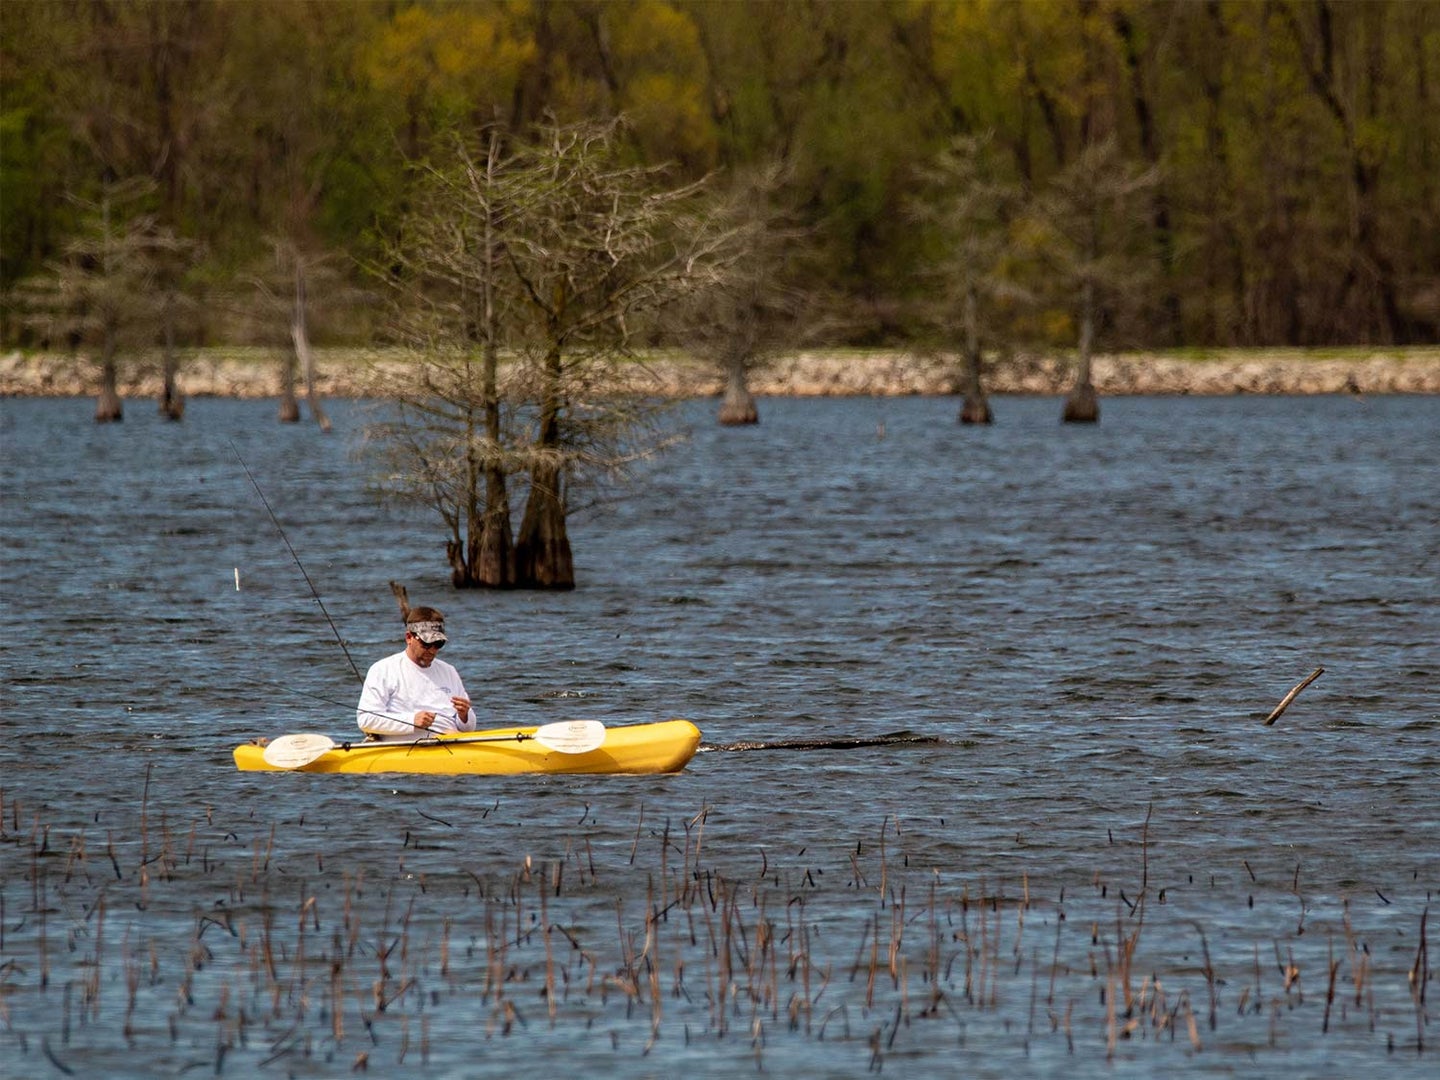 A man rides in a kayak across a lake using the best fishing motor.